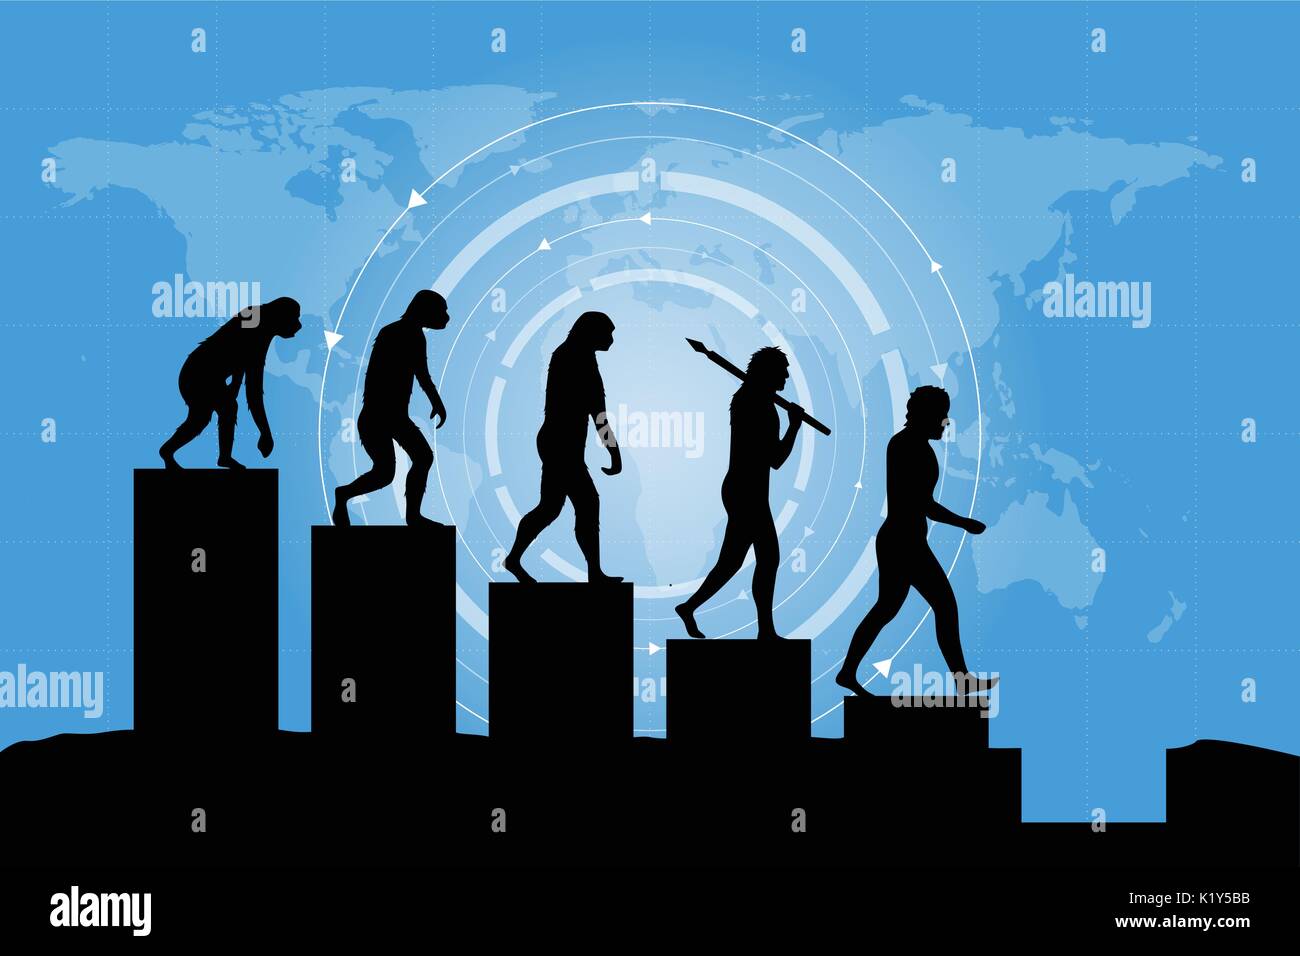 Human evolution into the present digital world. Business risk concept! Silhouette of human evolution in a negative way. Stock Vector